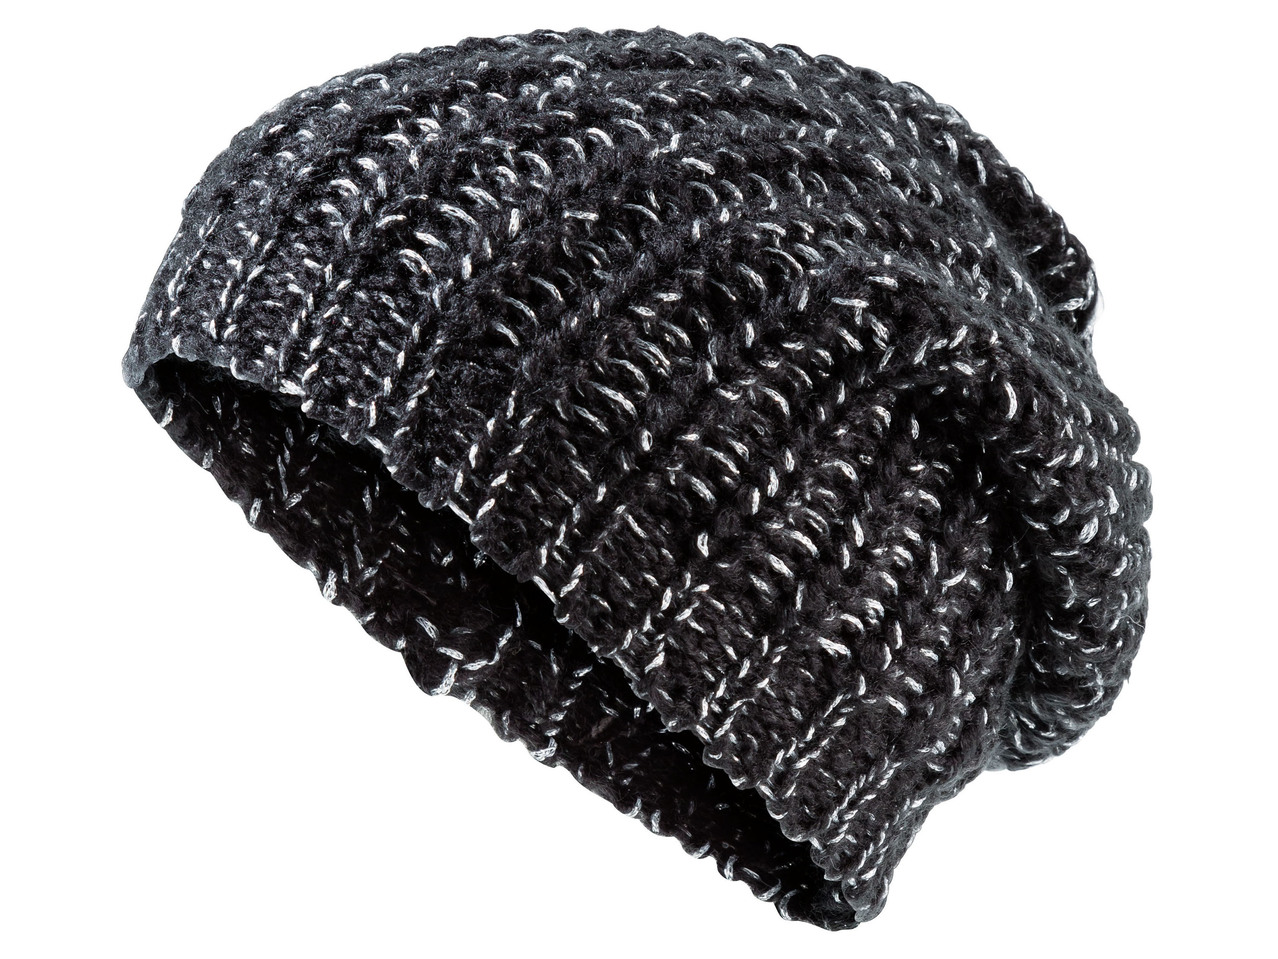 Ladies' Knitted Hat